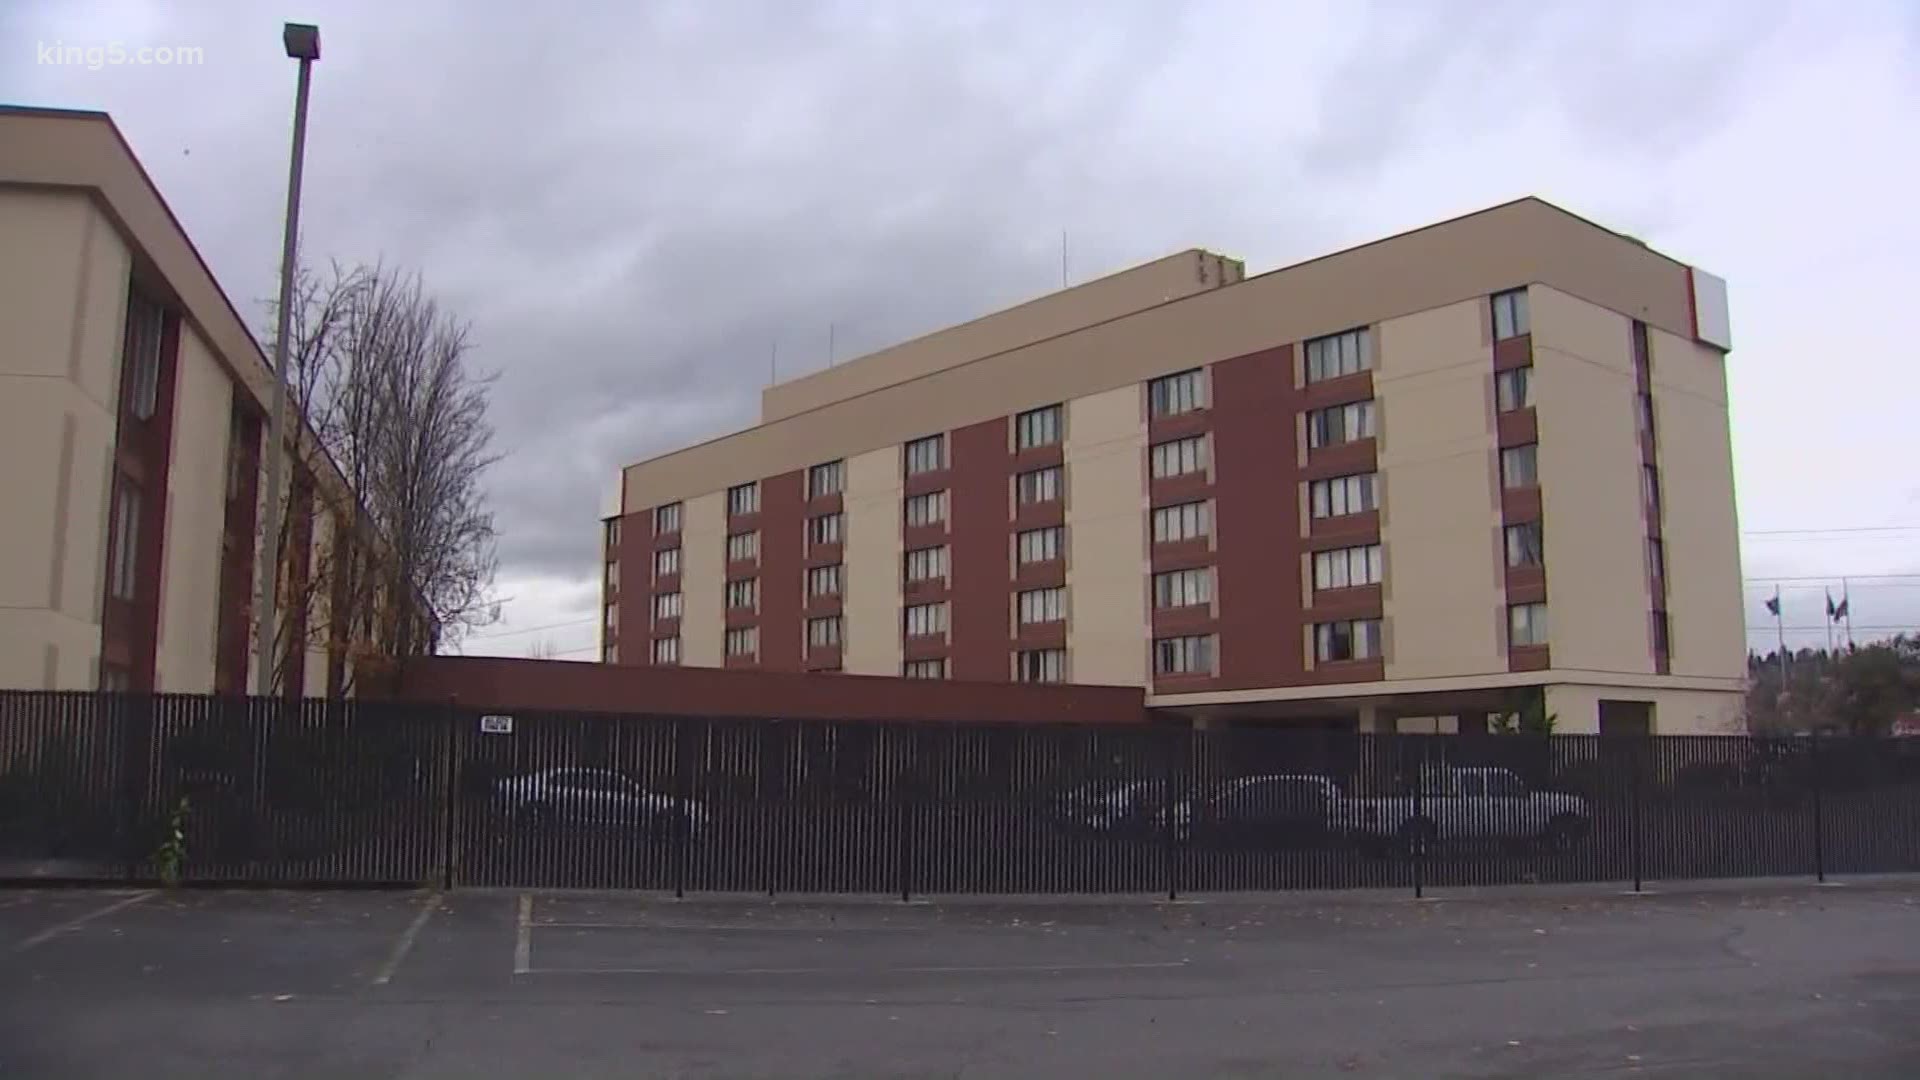 The city of Renton and King County are at odds over how to handle the Red Lion Hotel, which currently houses more than 200 homeless people.